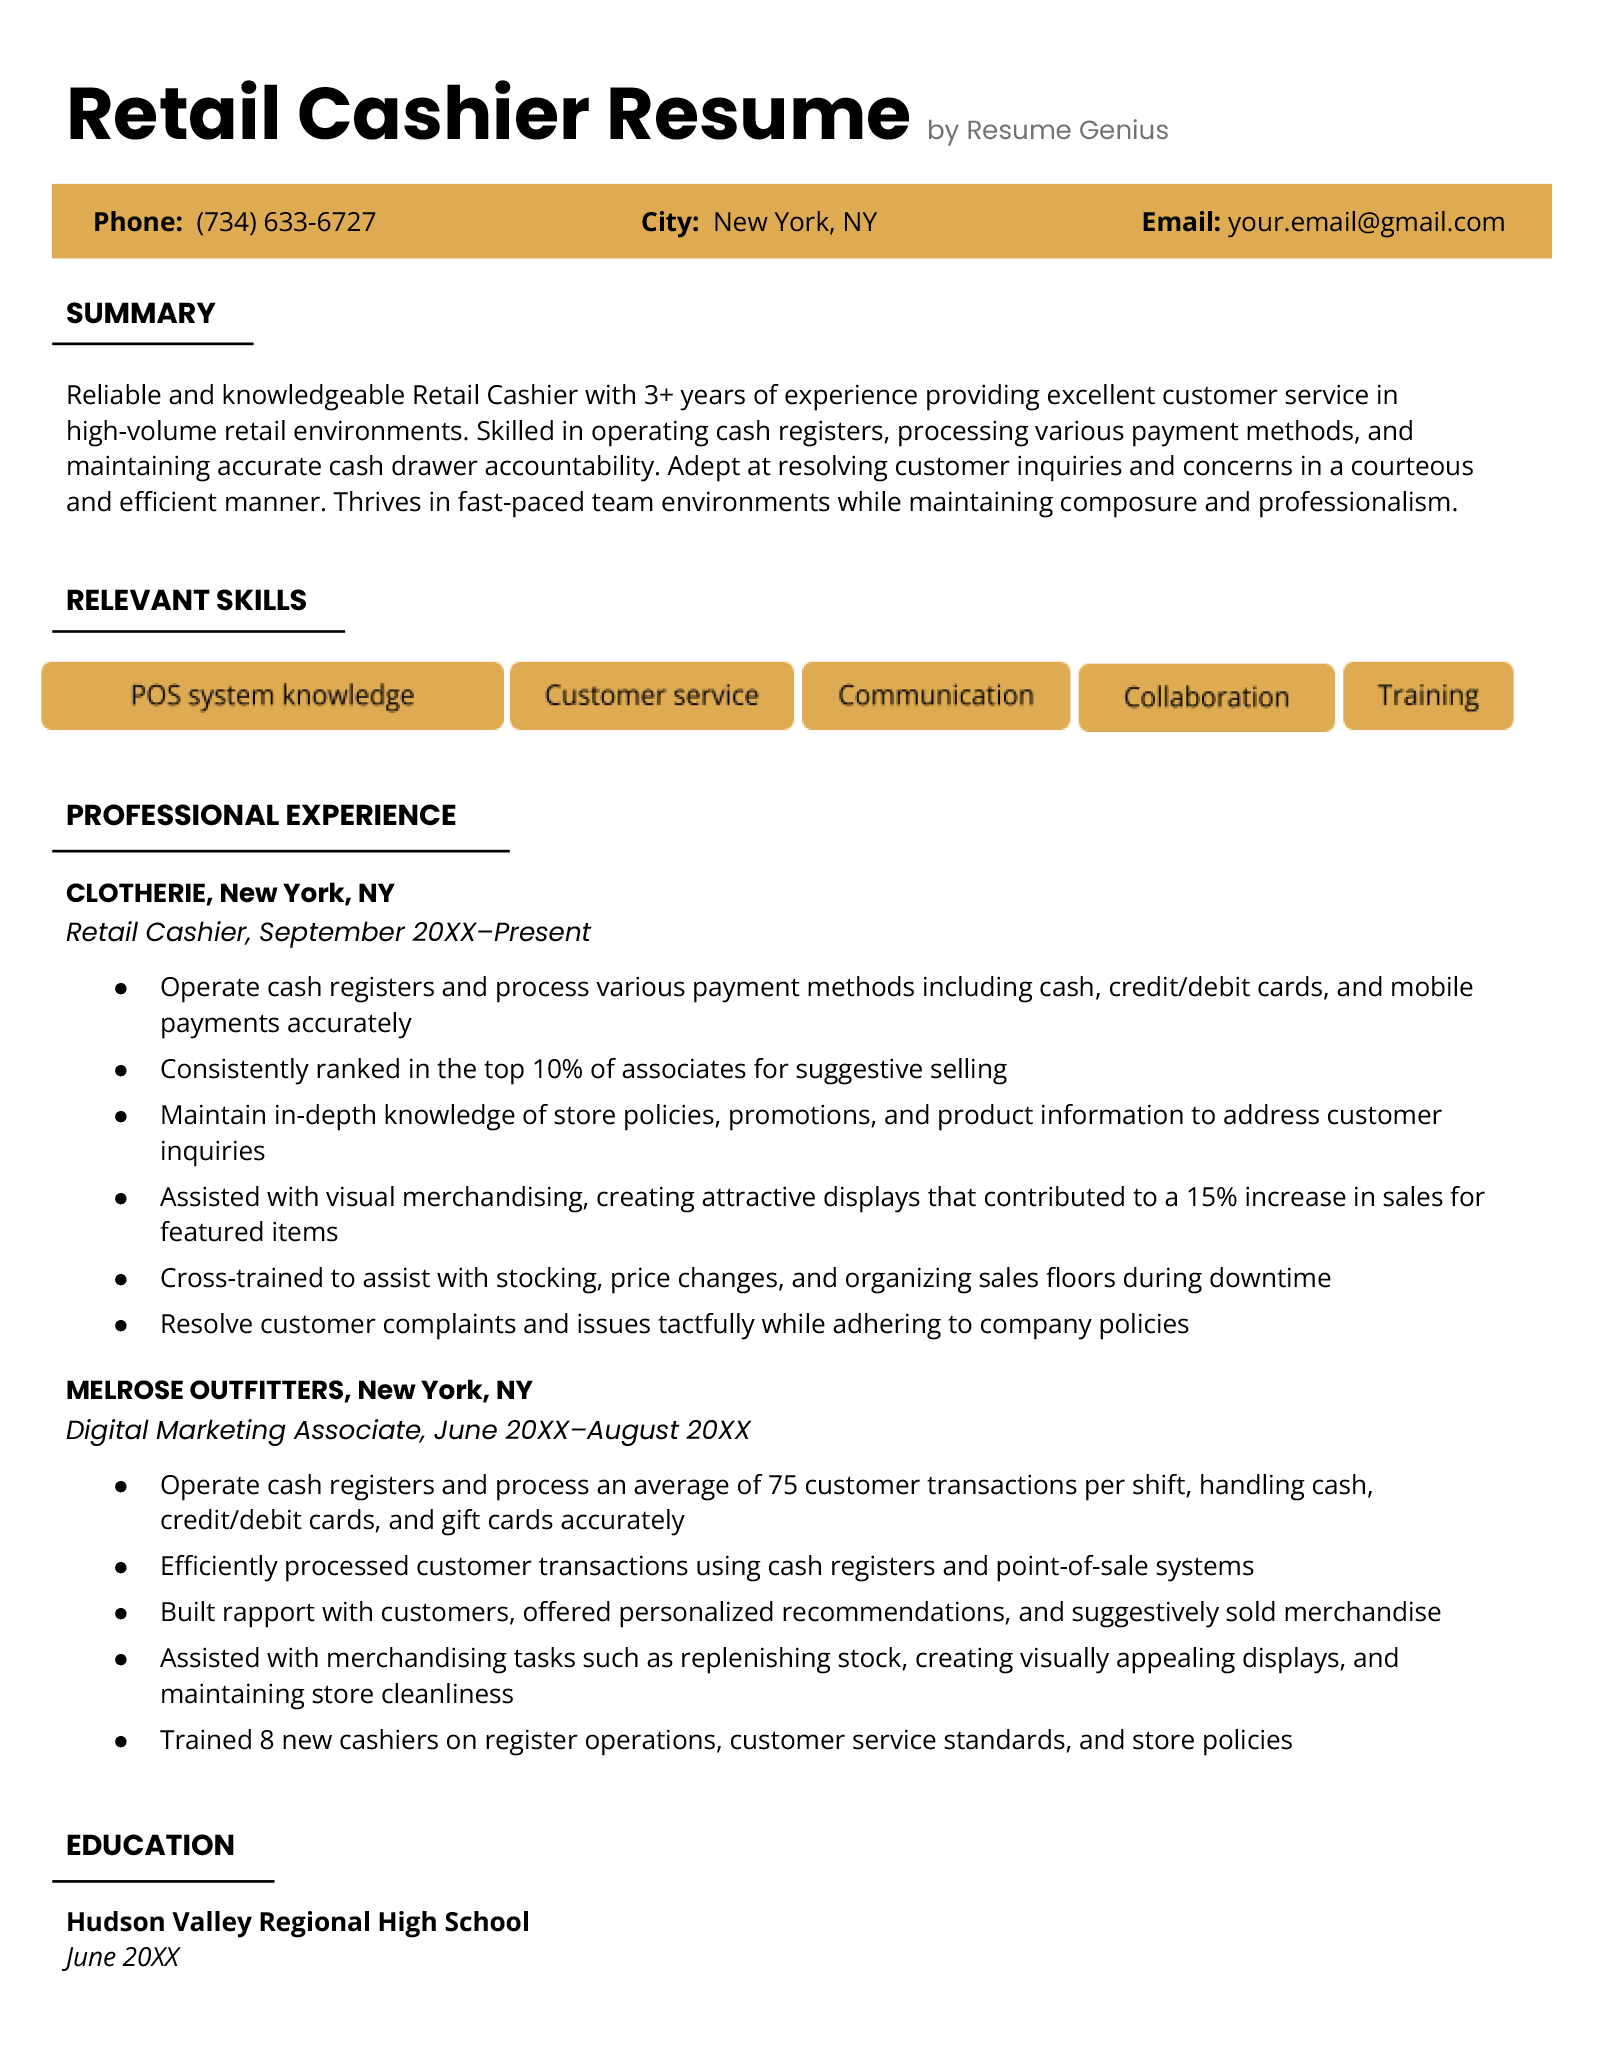 Example of a resume for a retail cashier. 